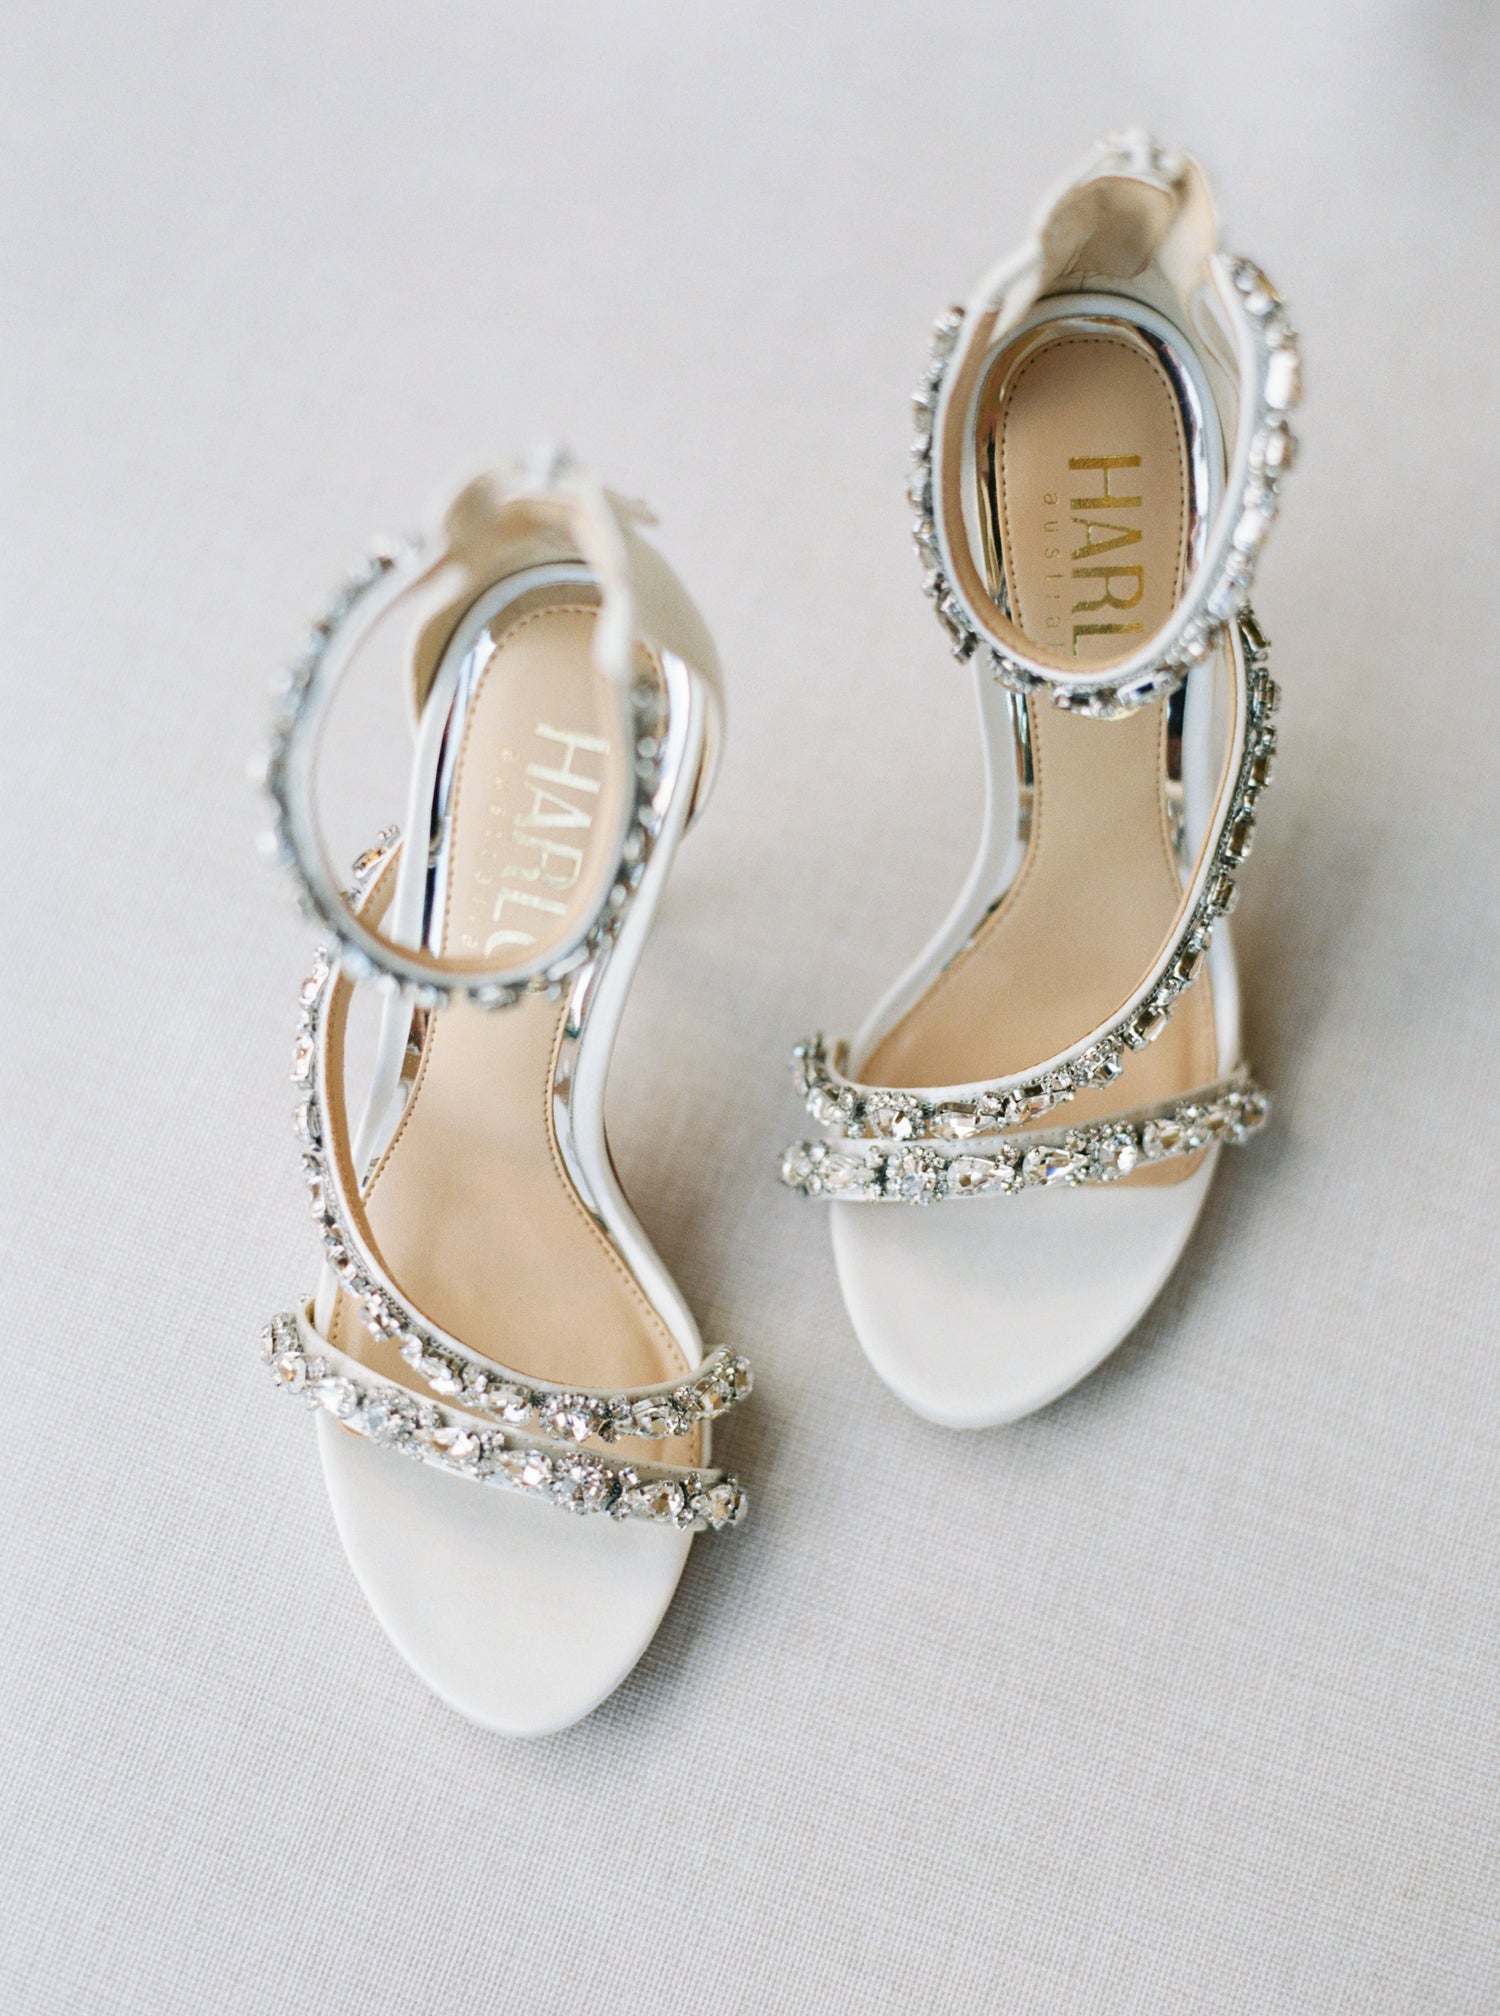 HARLO Shoes | Buy HARLO Wedding Shoes for Your Big Day | The White ...